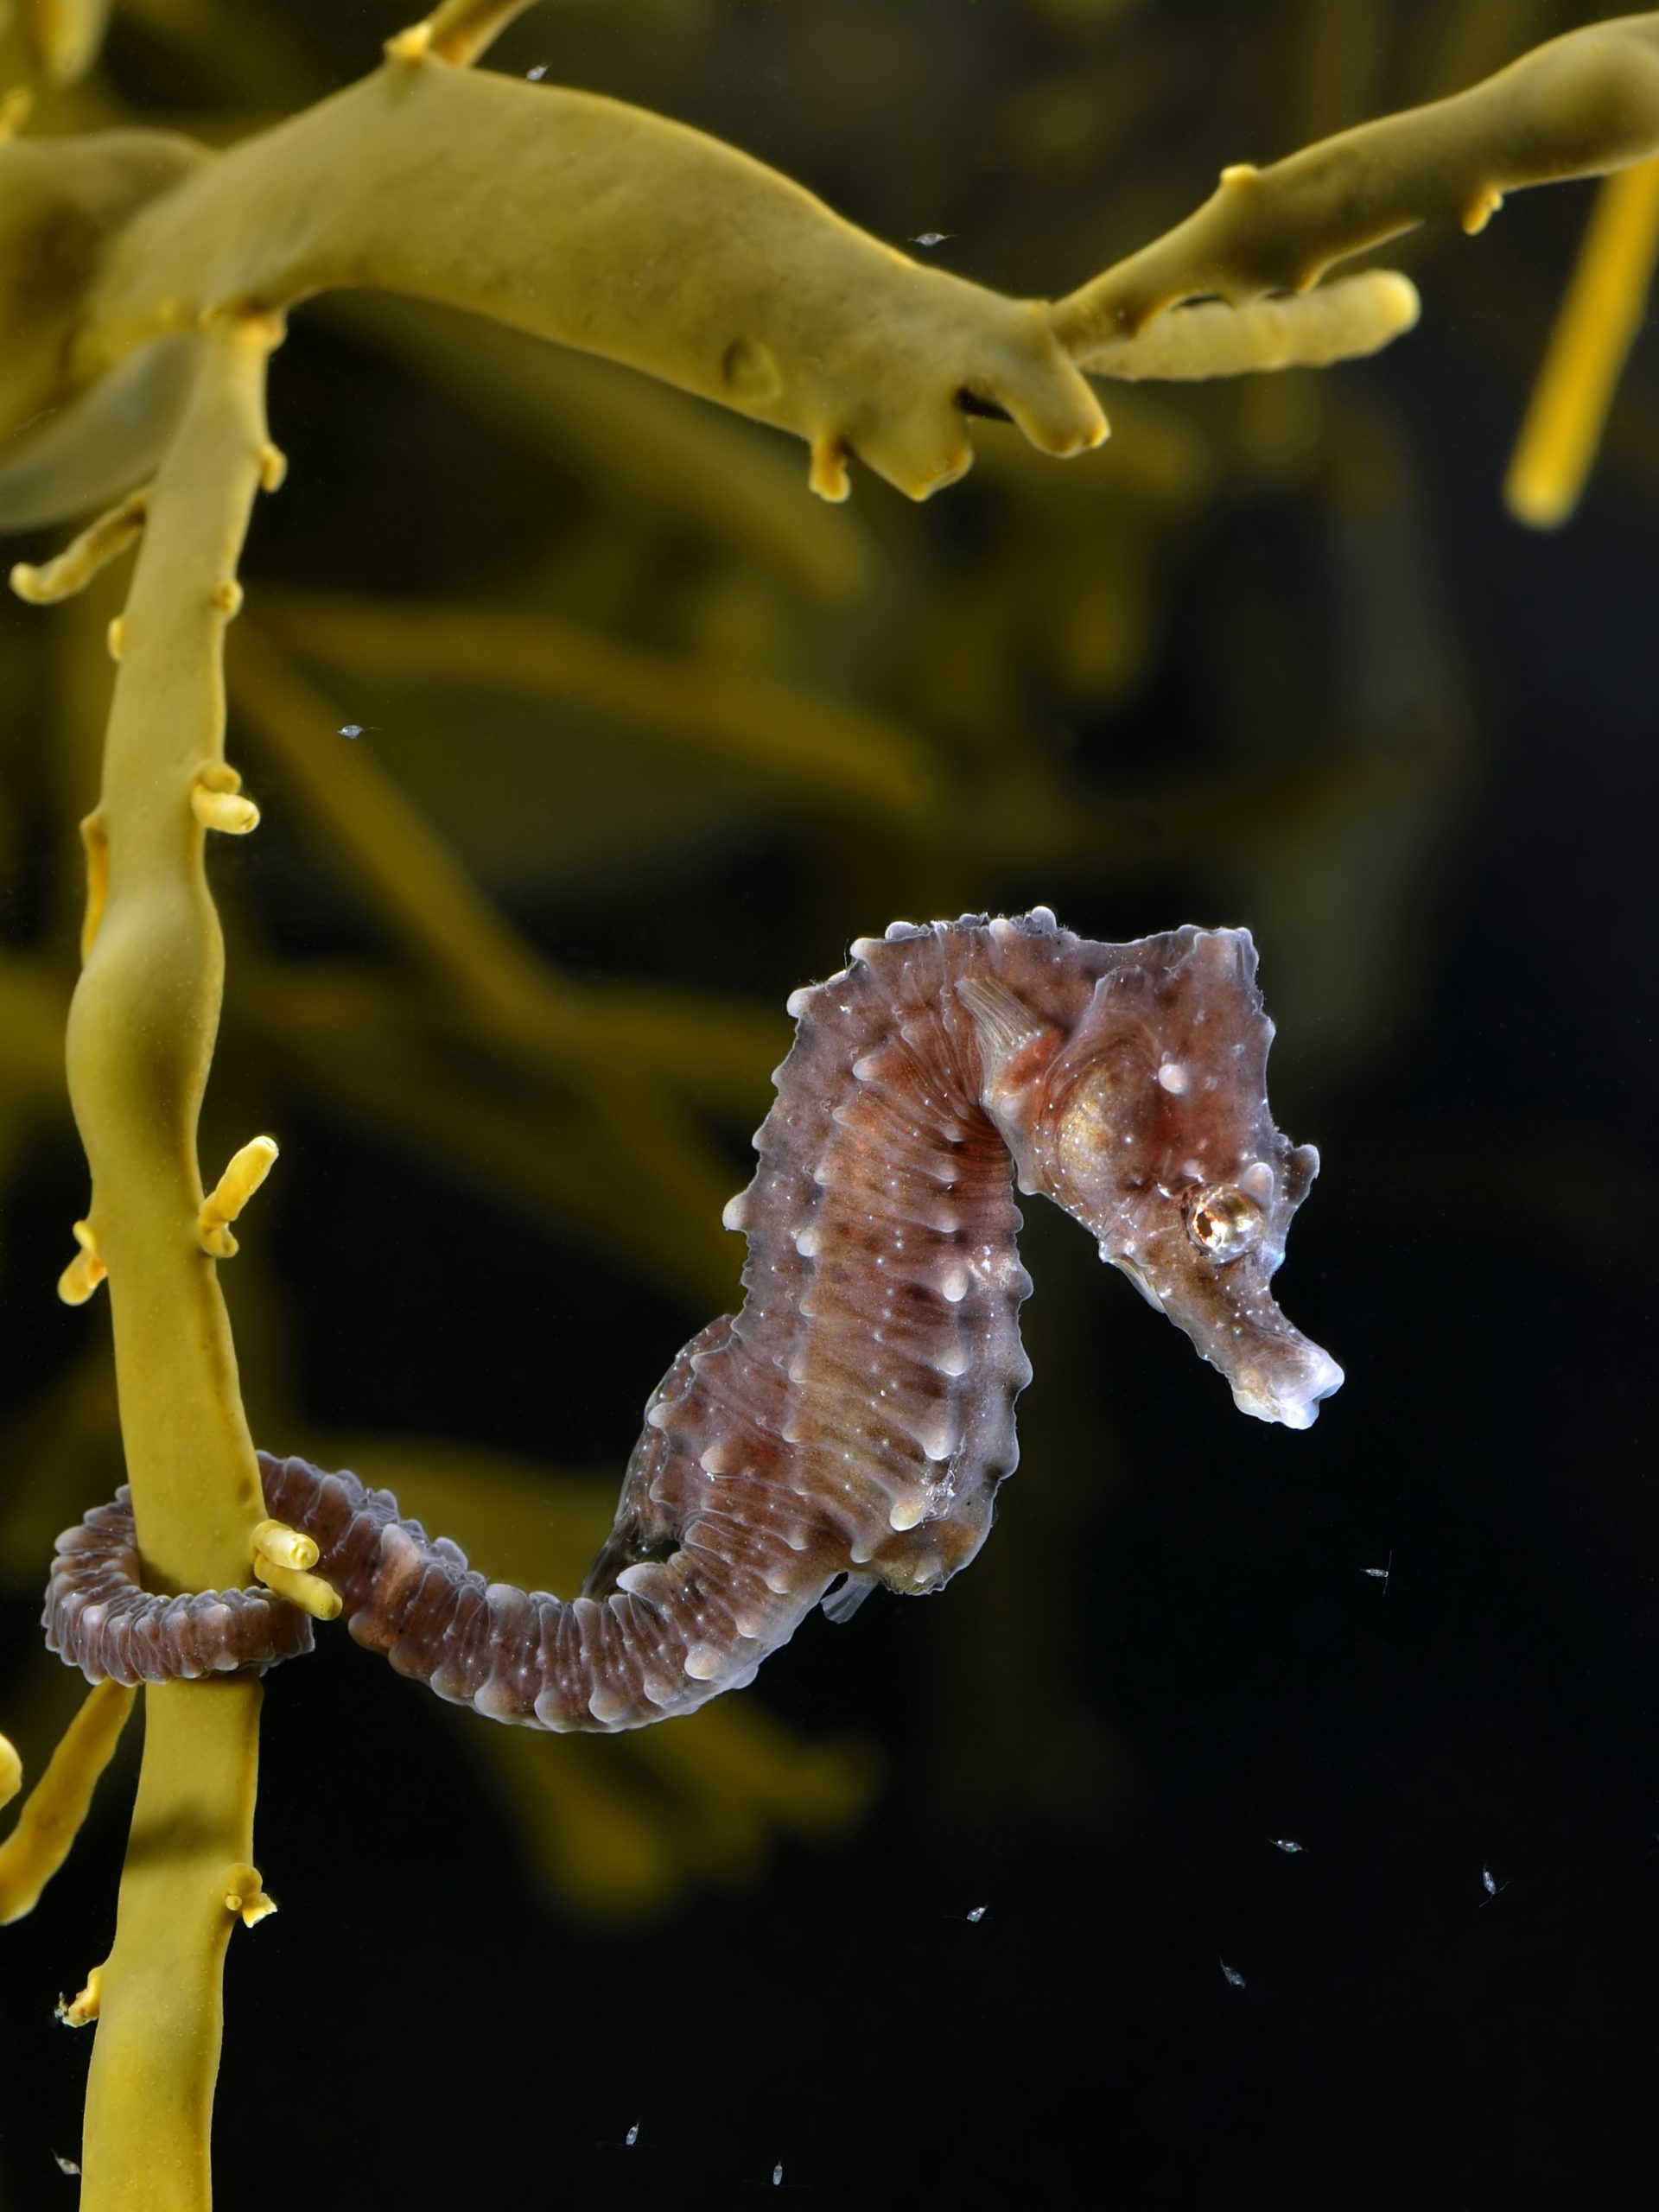 Seahorses Have The Ultimate ‘Dad Bod’